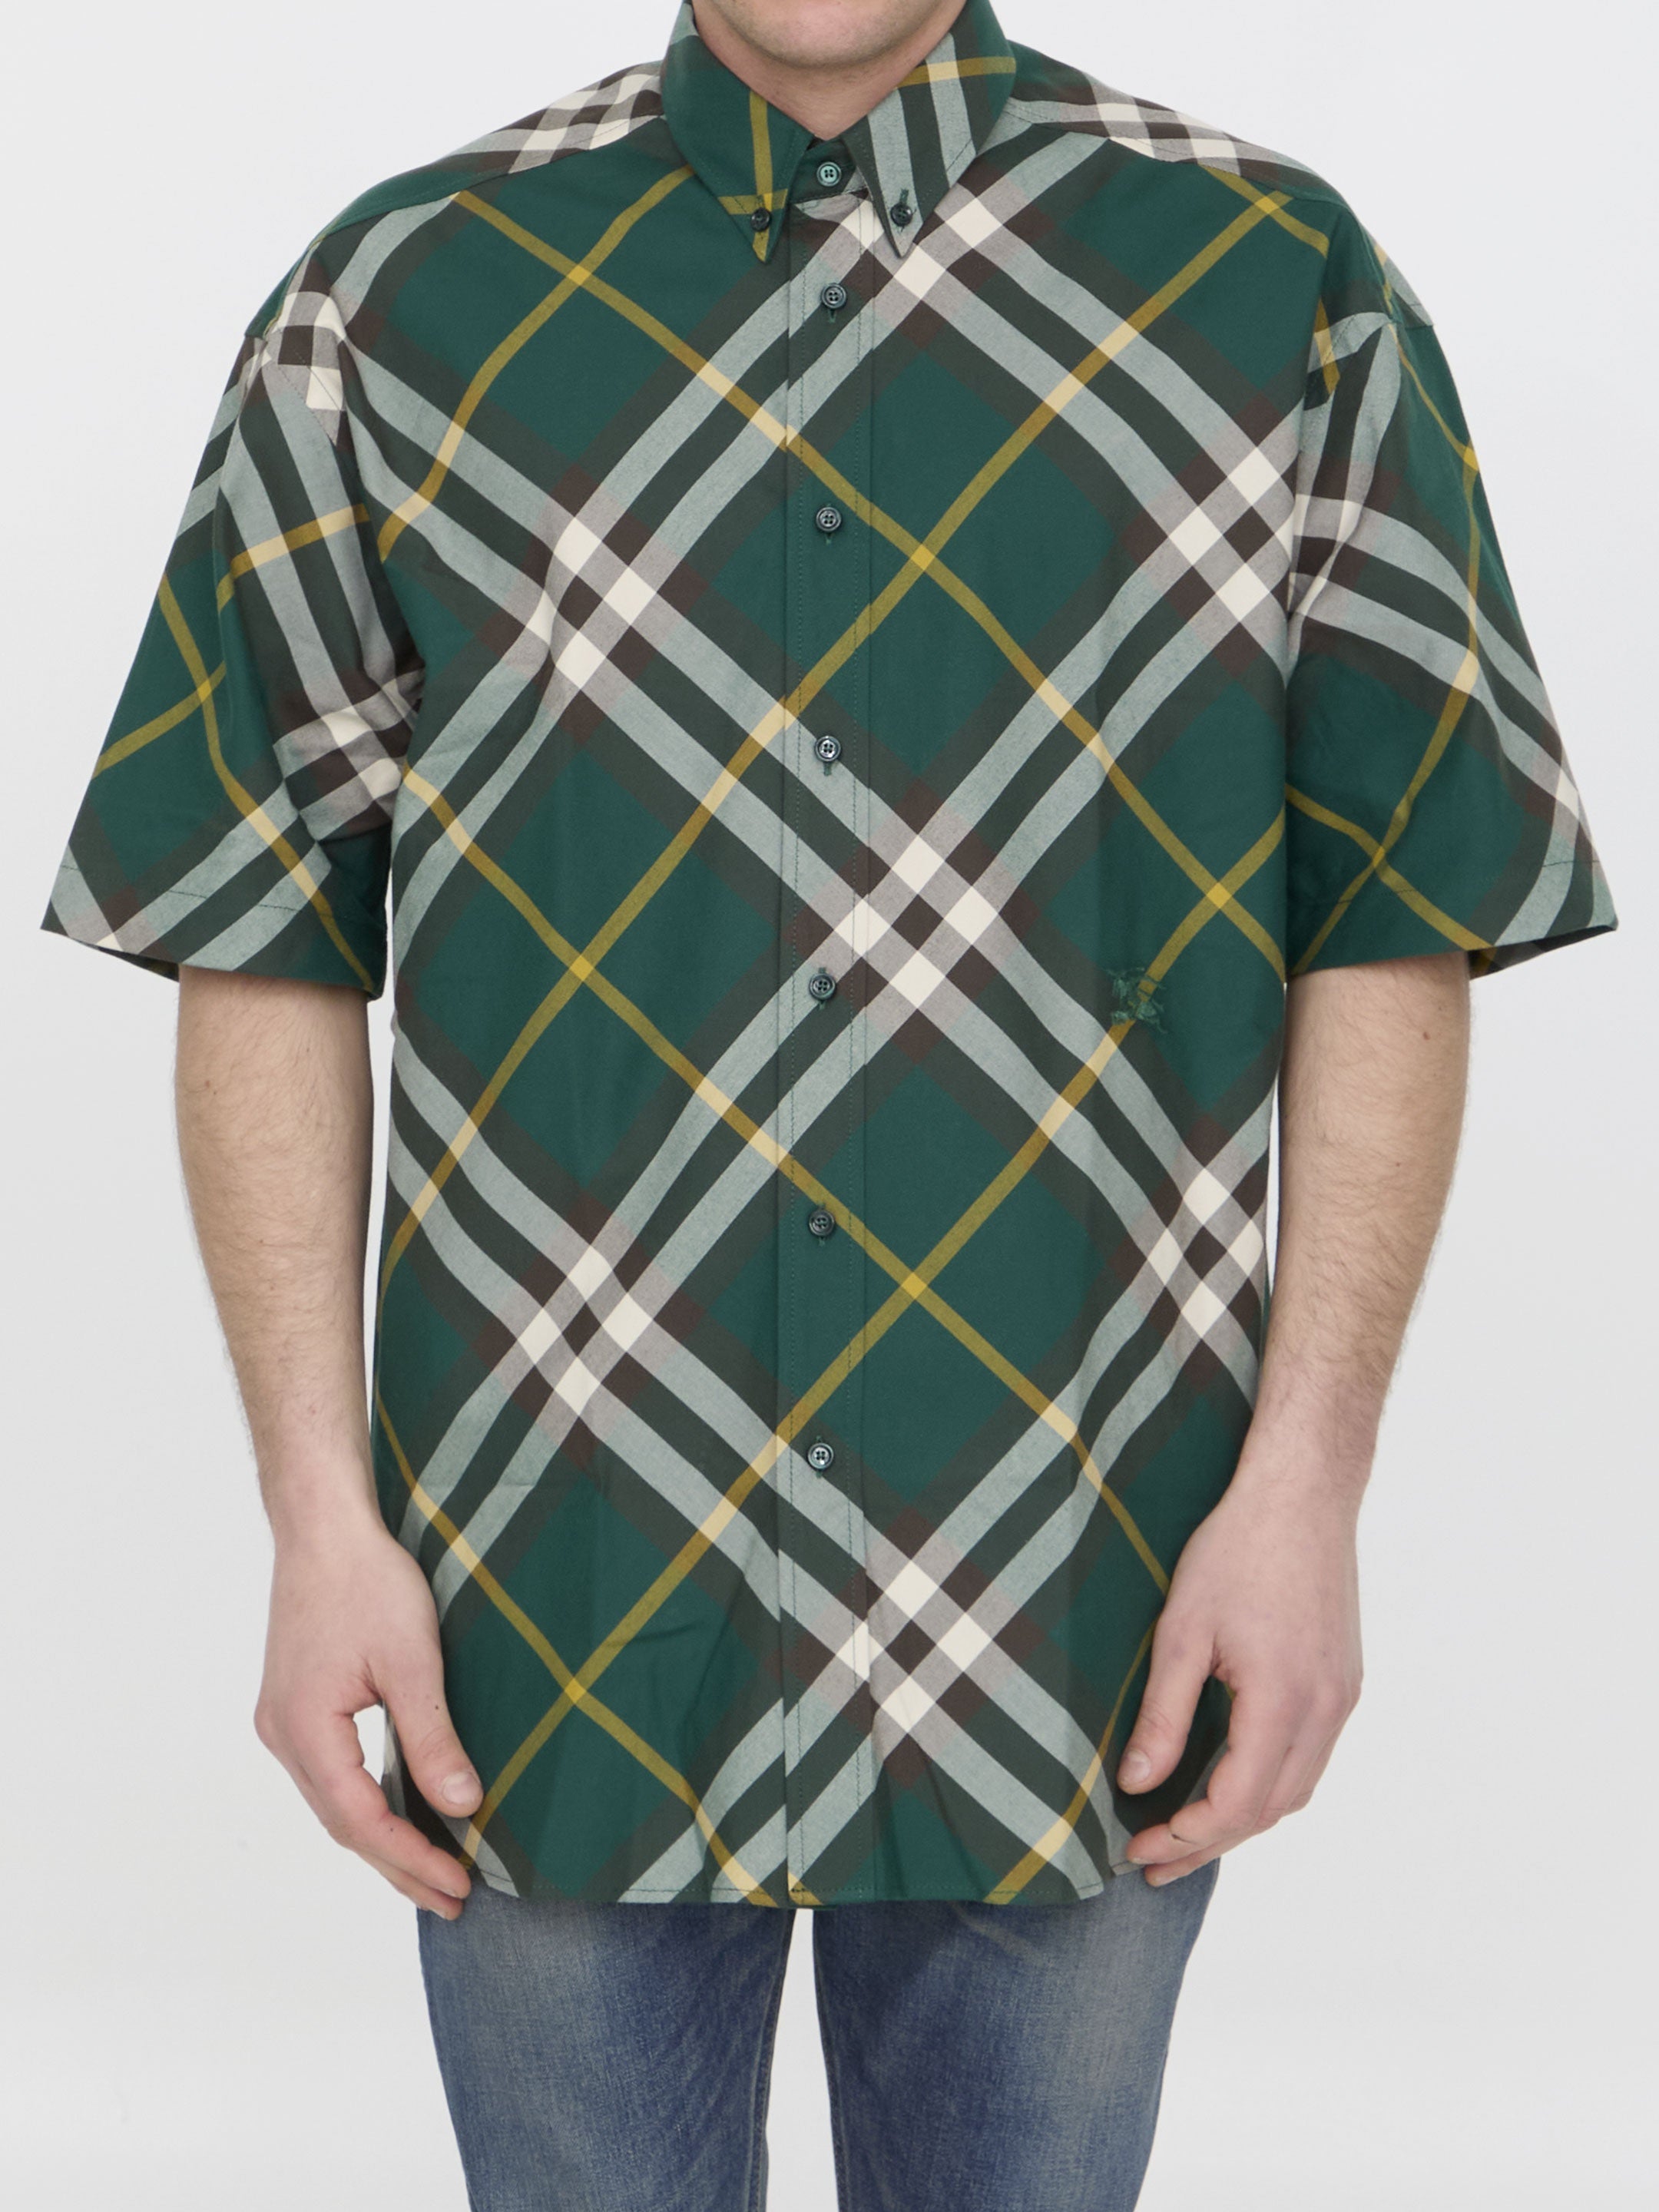 BURBERRY-OUTLET-SALE-Check-cotton-shirt-Shirts-L-GREEN-ARCHIVE-COLLECTION.jpg